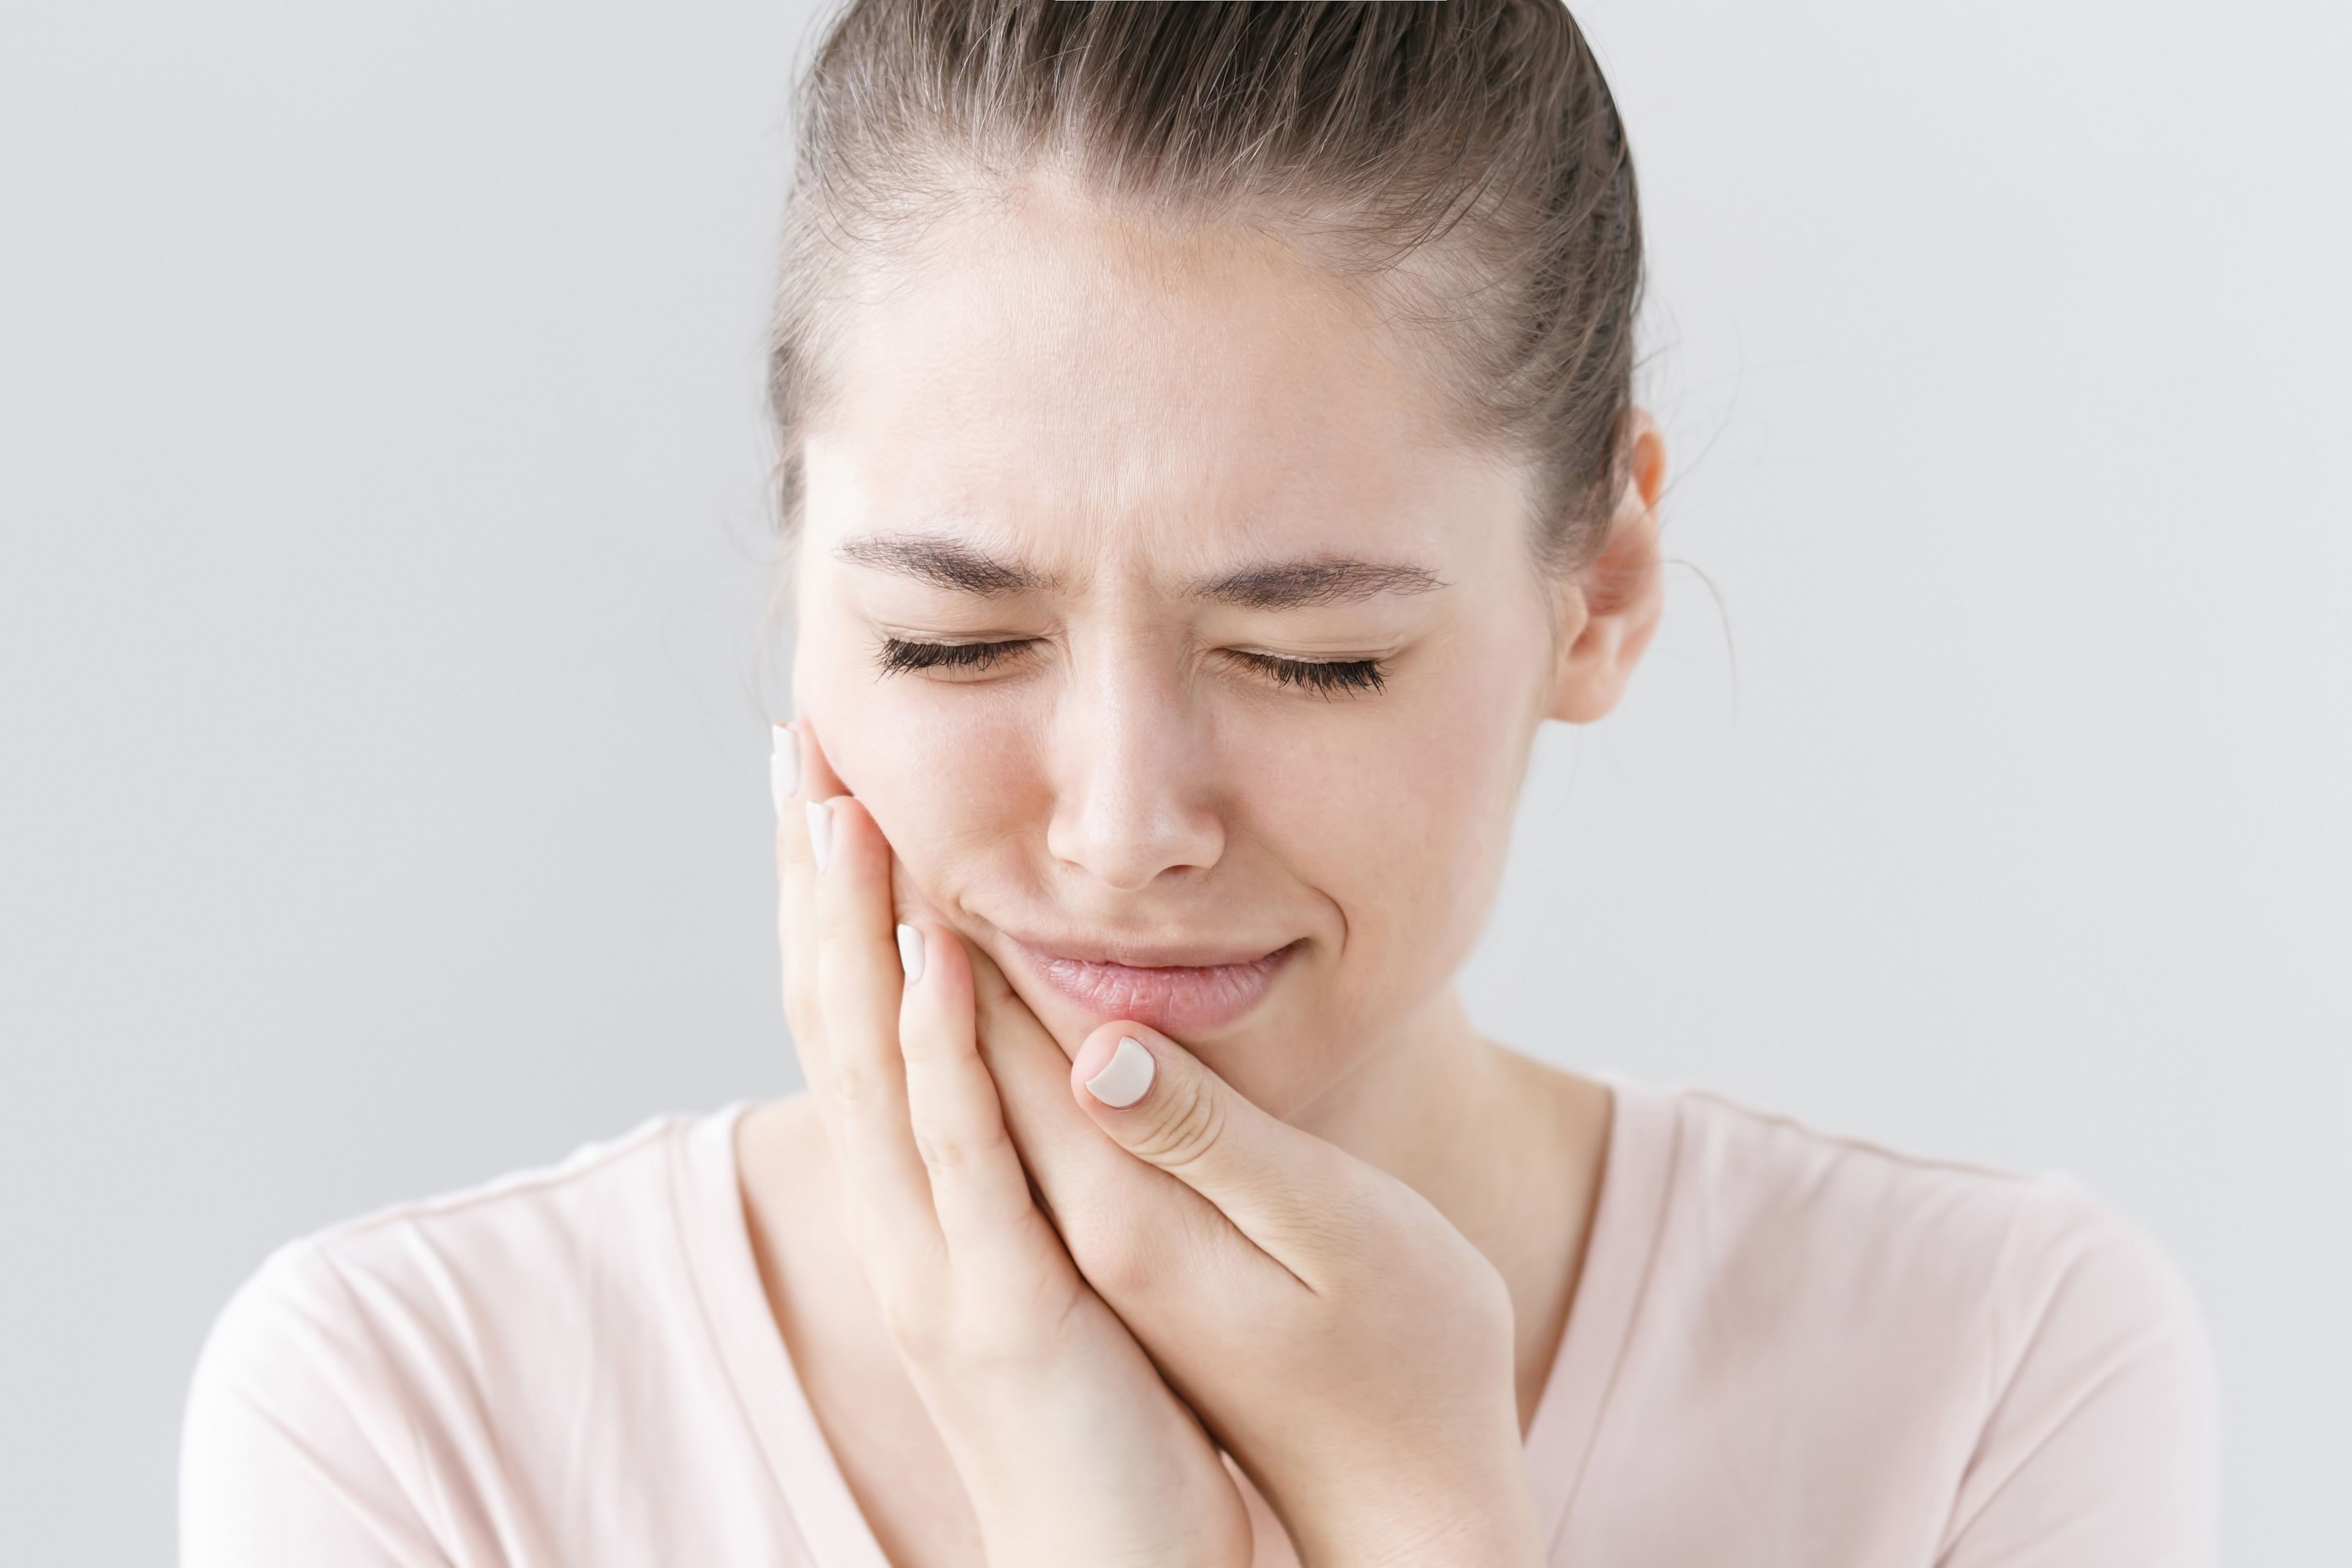 Toothache? Here are some tips